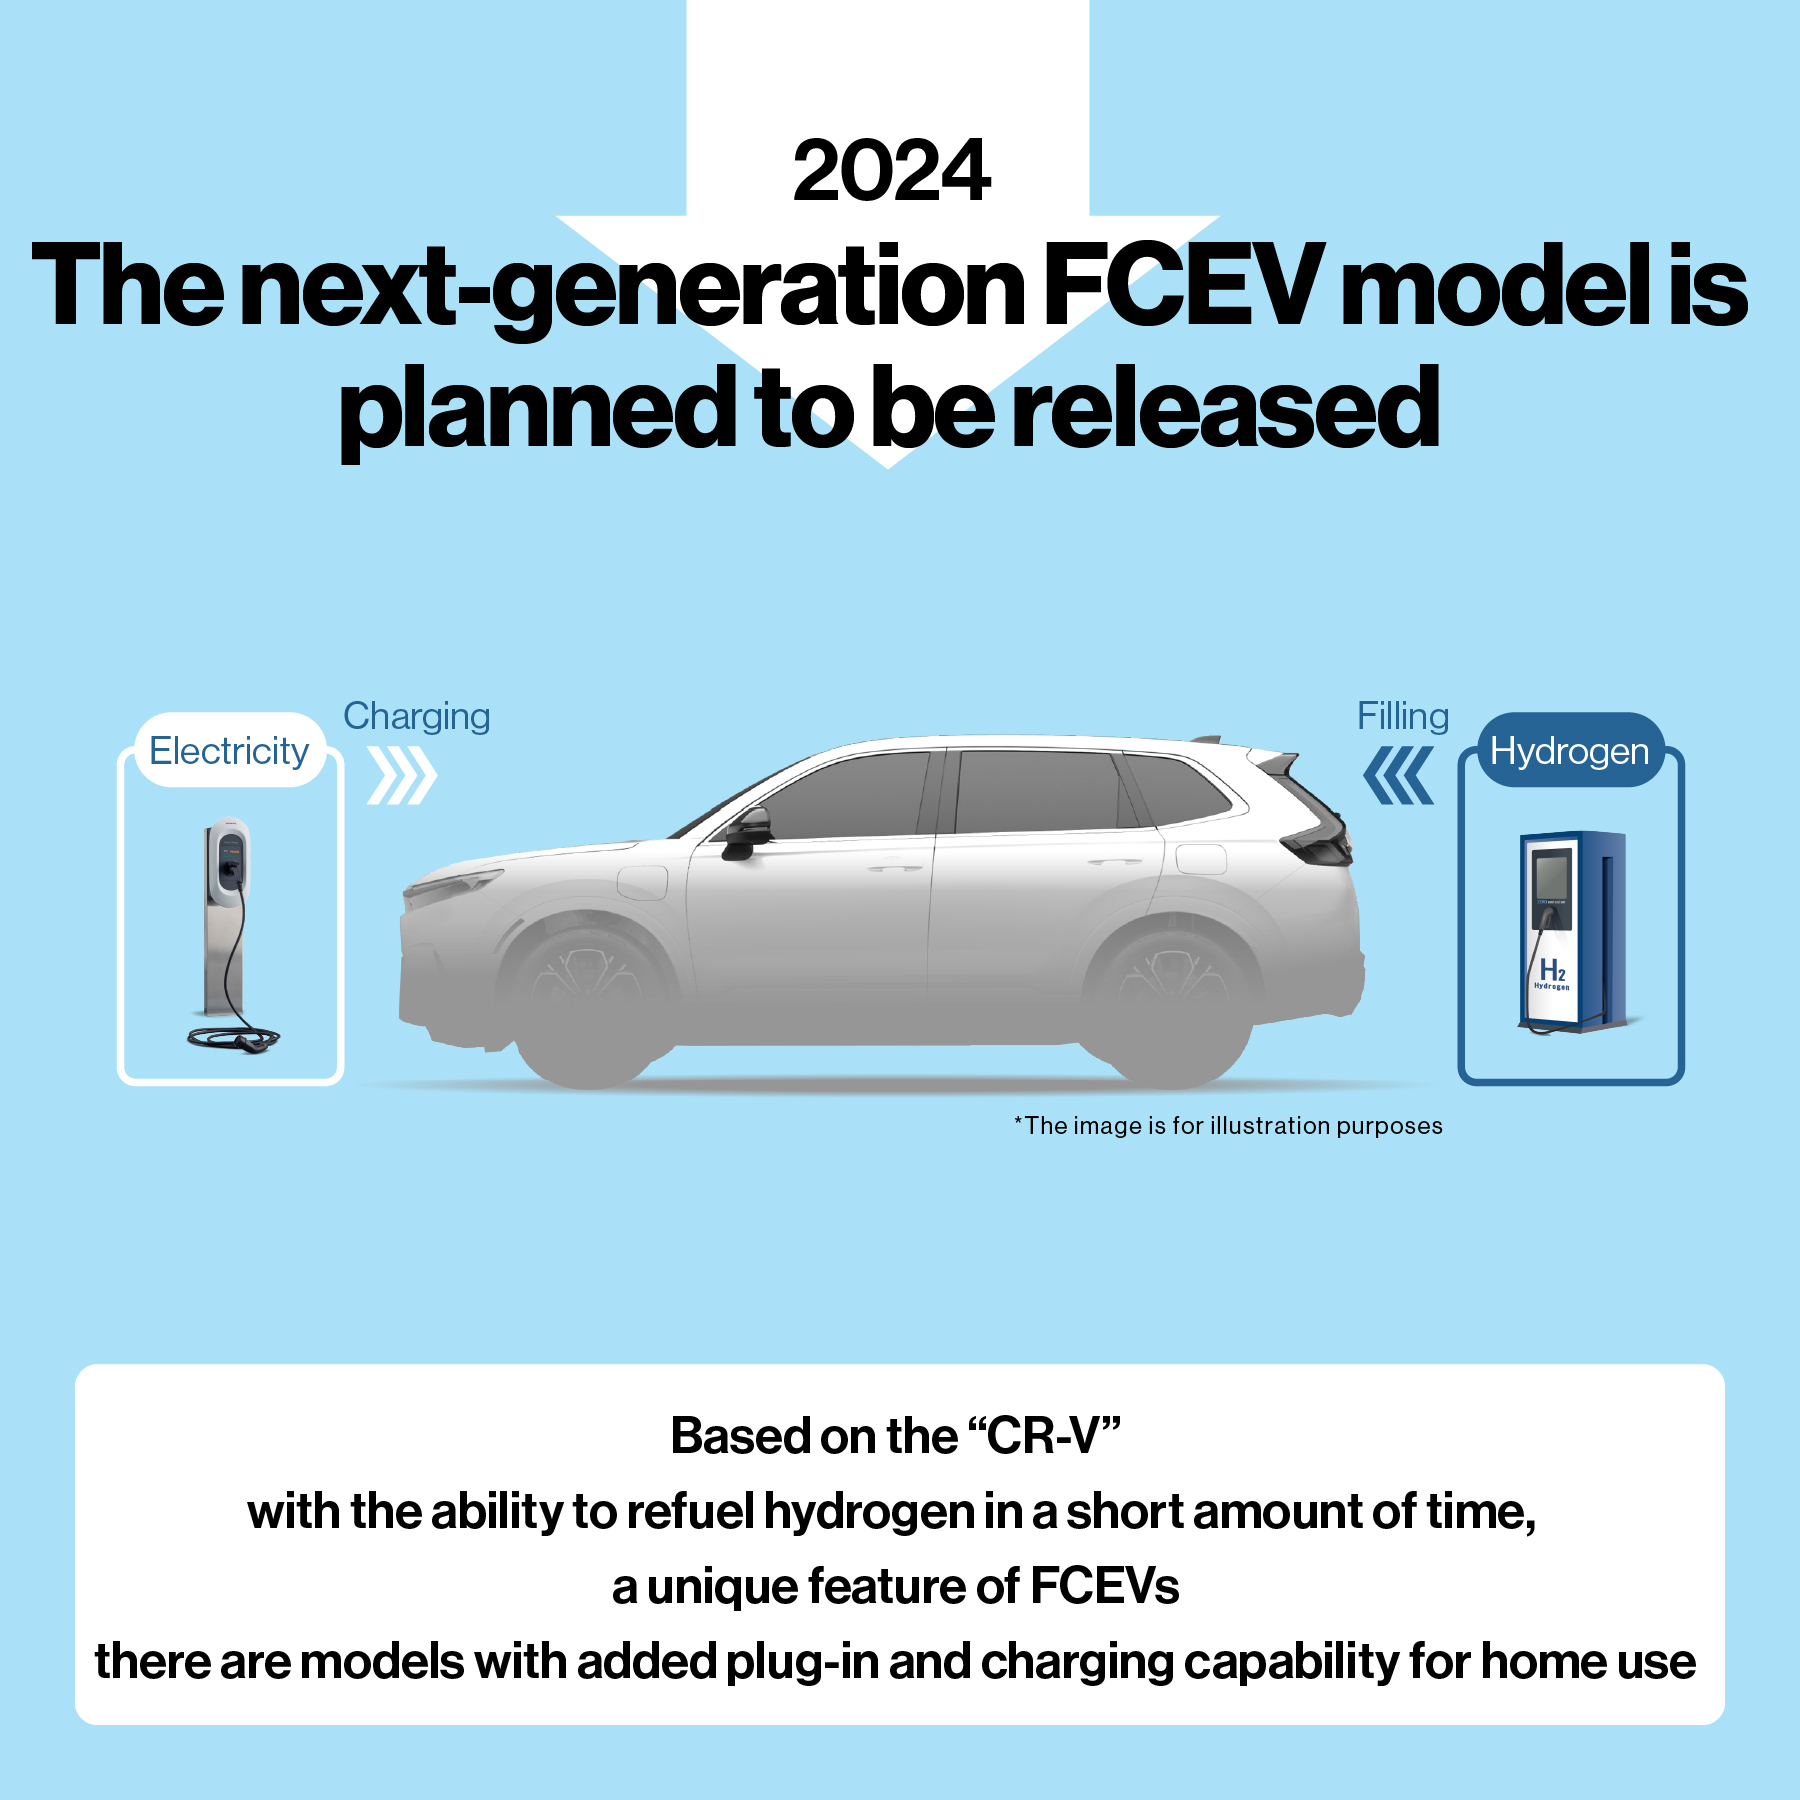 Honda plans to release the next-generation FCEV model in 2024